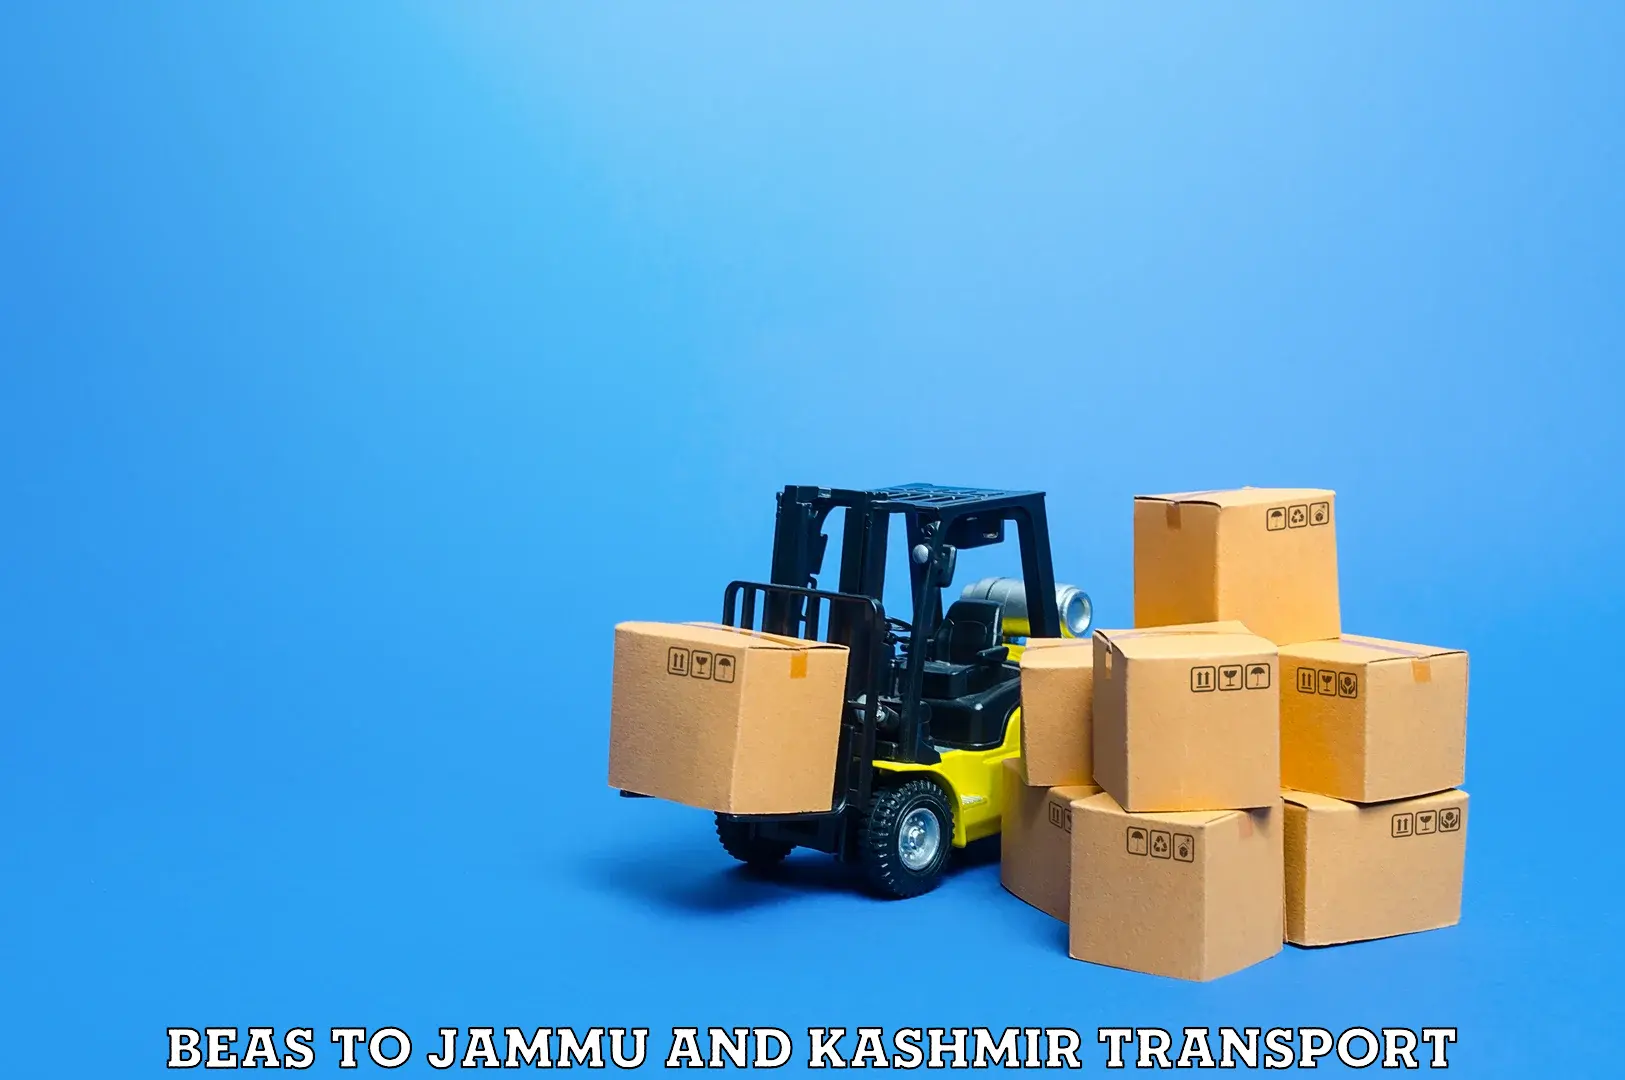 Daily parcel service transport Beas to Jammu and Kashmir